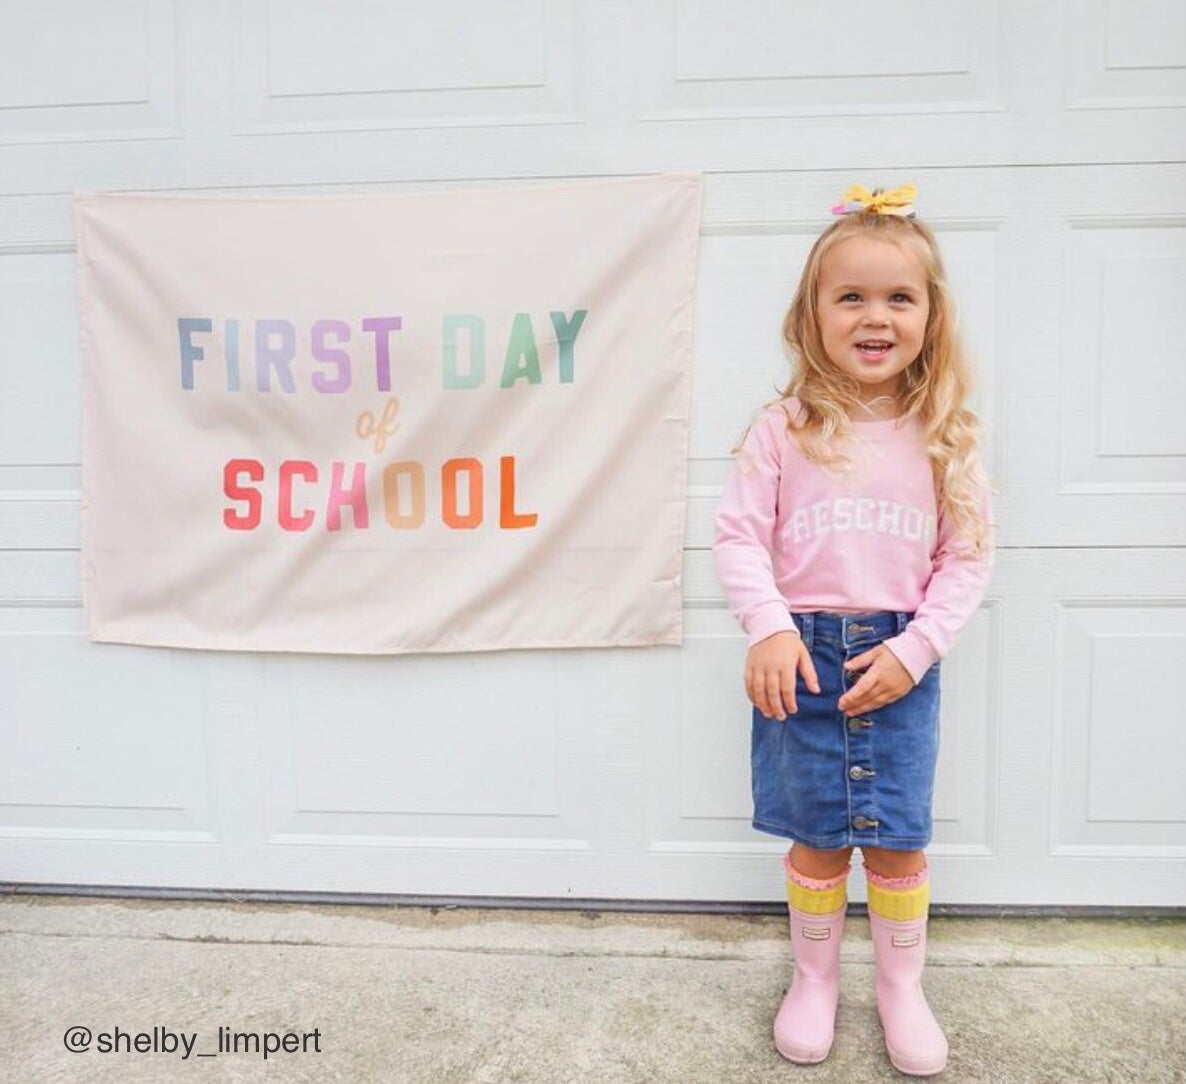 {Rainbow} First Day of School Banner